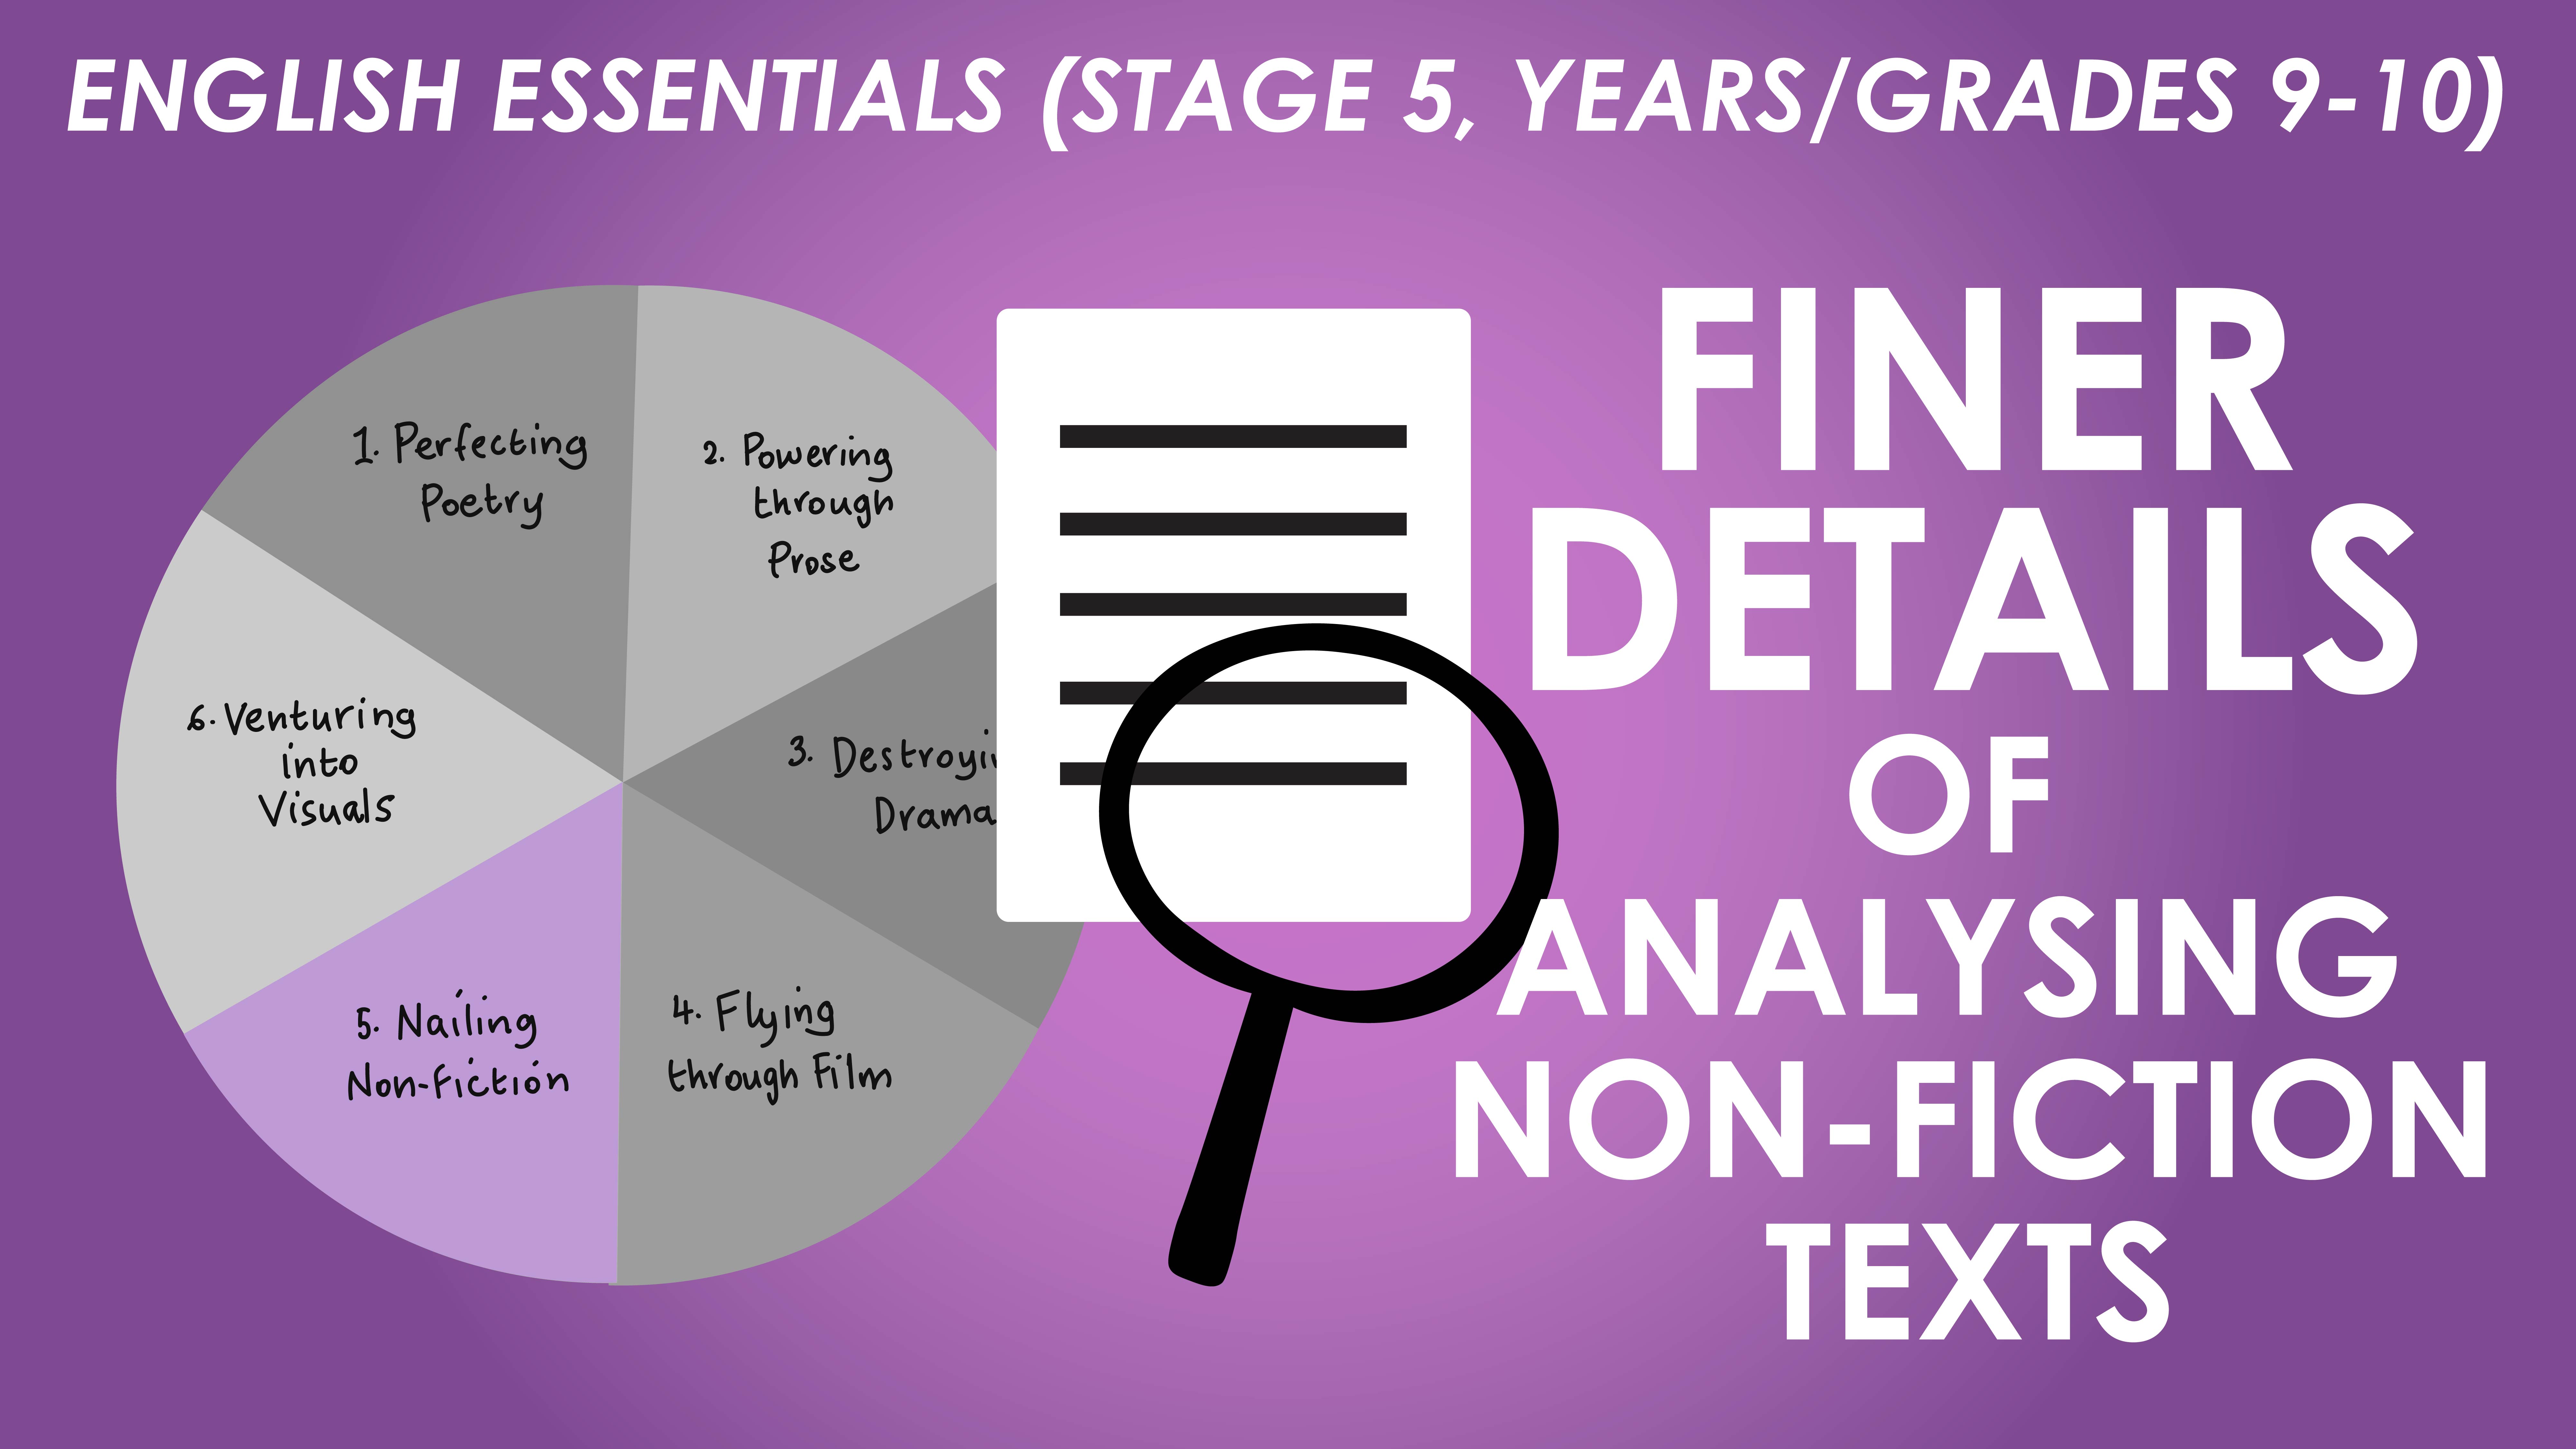 English Essentials - Nailing Non-fiction - Finer Details of Analysing Non-fiction Texts (Stage 5, Years/Grades 9-10)